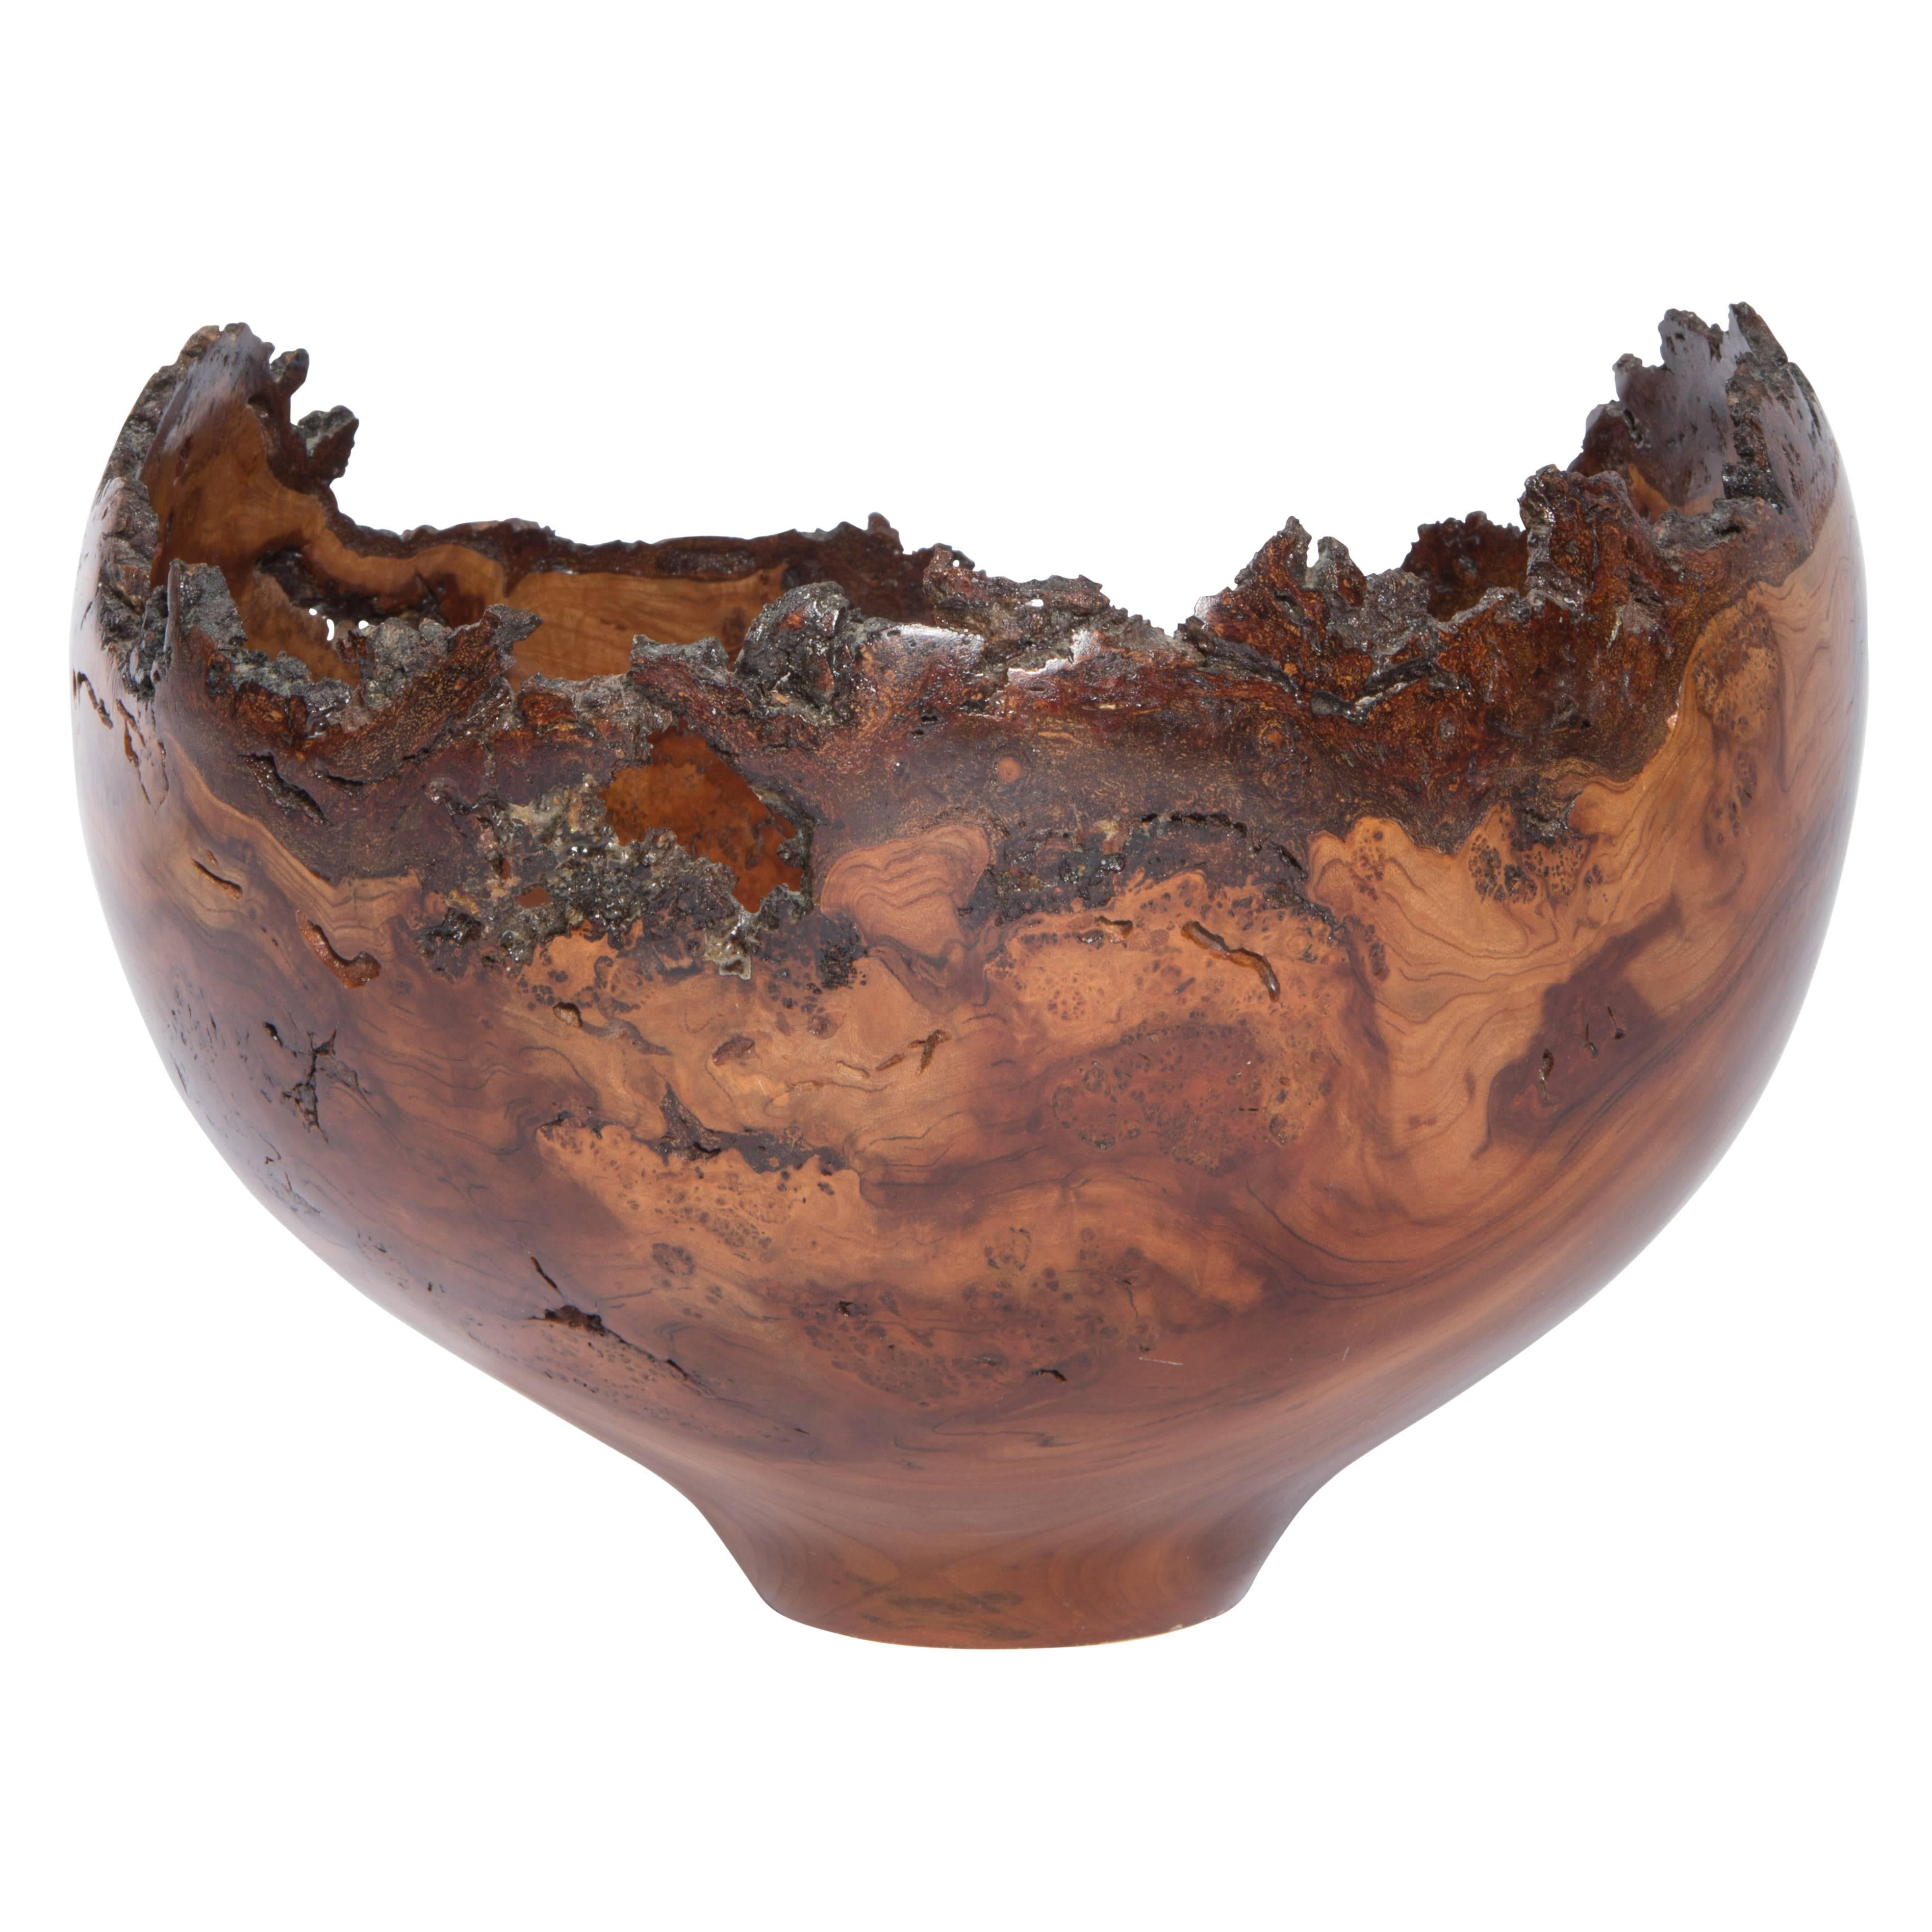 Gorgeous turned Wild Cherry bowl featuring rich swirls of grain and a very dramatic live-edge lip. Signed on the bottom 